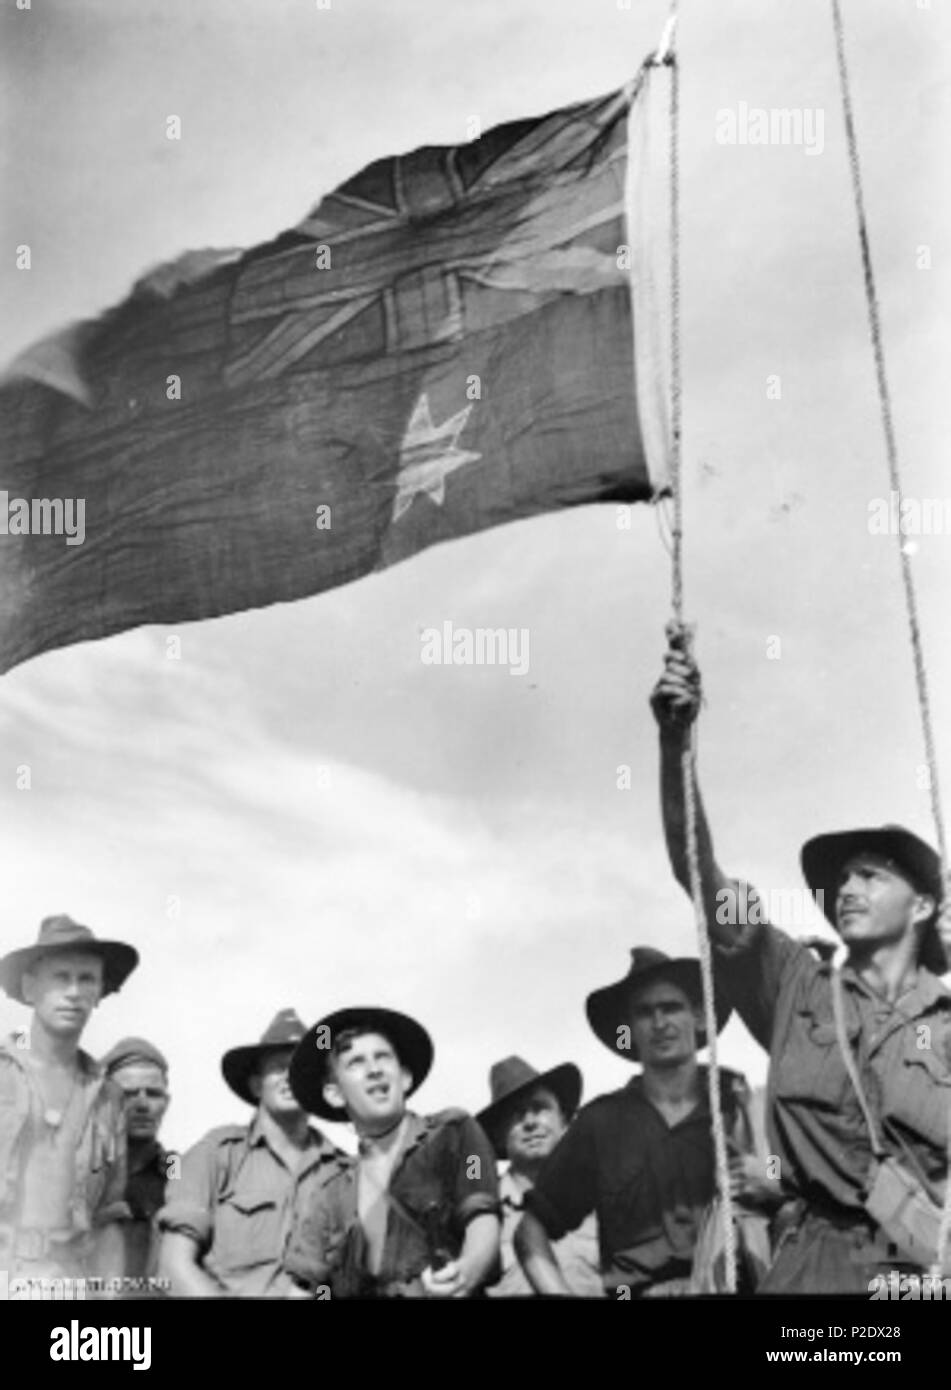 . Australian War Memorial (AWM) catalog number 090925. Members of the Australian 2/4th Cavalry Commando Squadron raise the Australian flag over Sadau Island on 30 April 1945. This was the first time Australian troops had captured non-Australian territory during the Pacific War. 30 April 1945. Not recorded 5 Aust flag Sadau (090925) Stock Photo